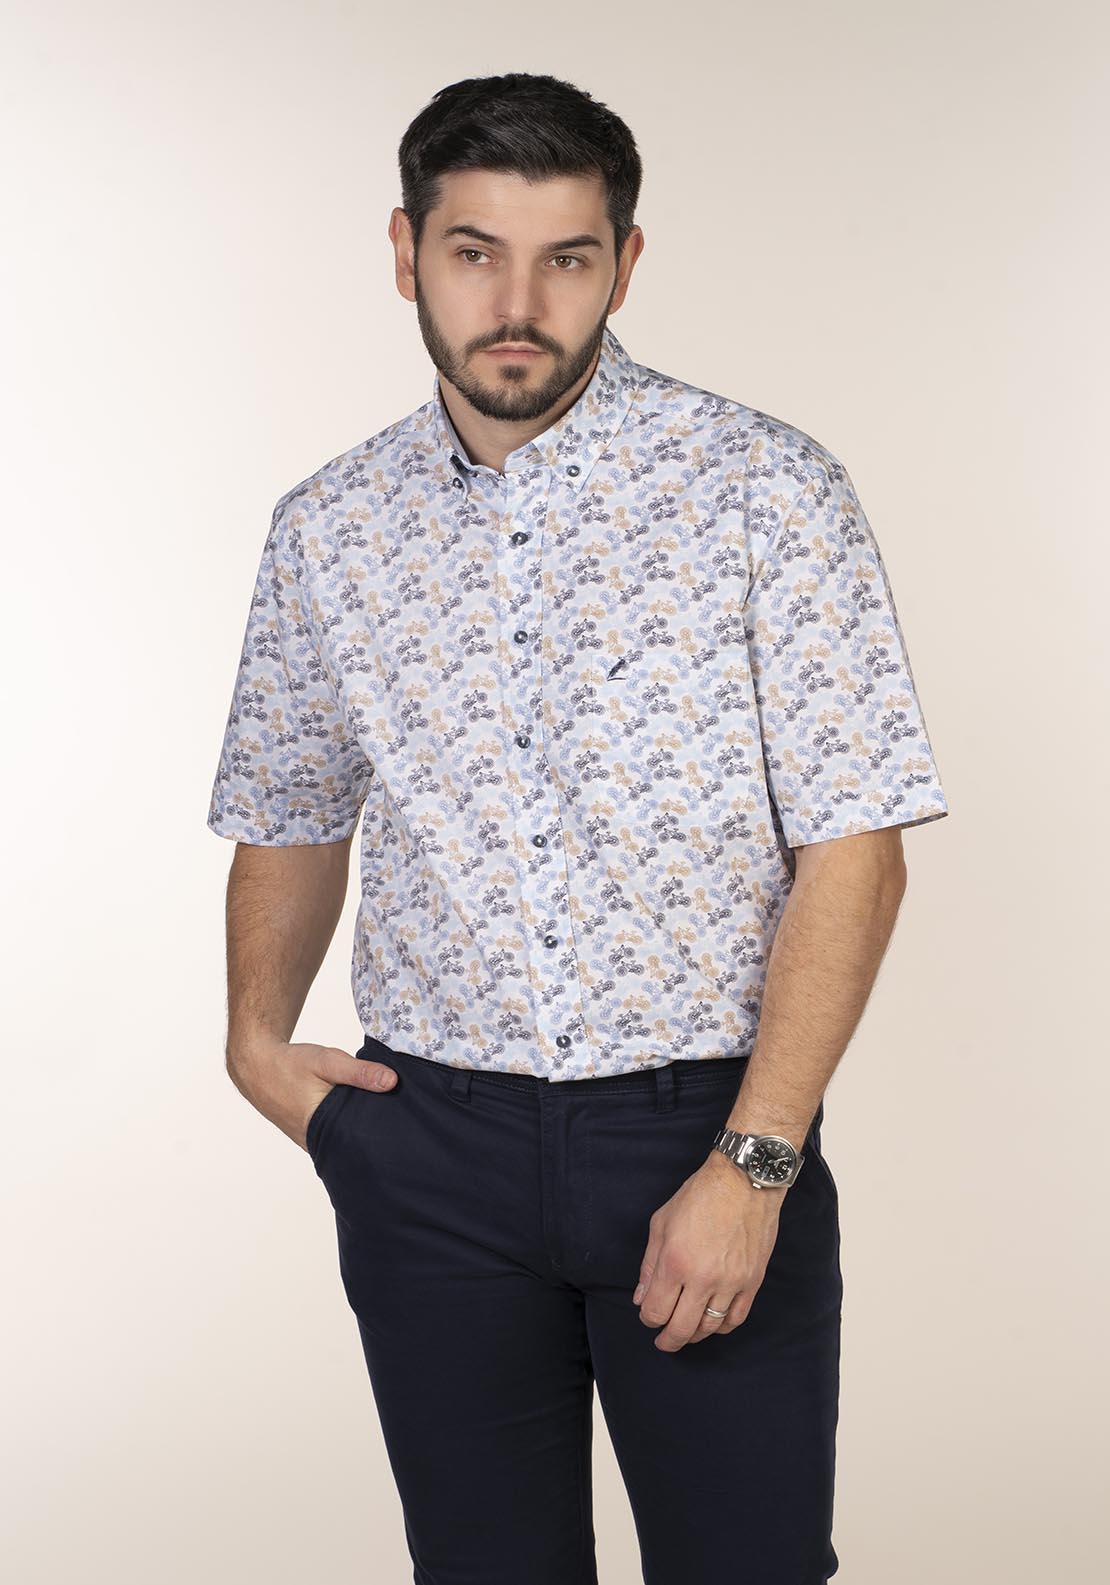 Yeats Casual Patterned Short Sleeve Shirt 2 Shaws Department Stores